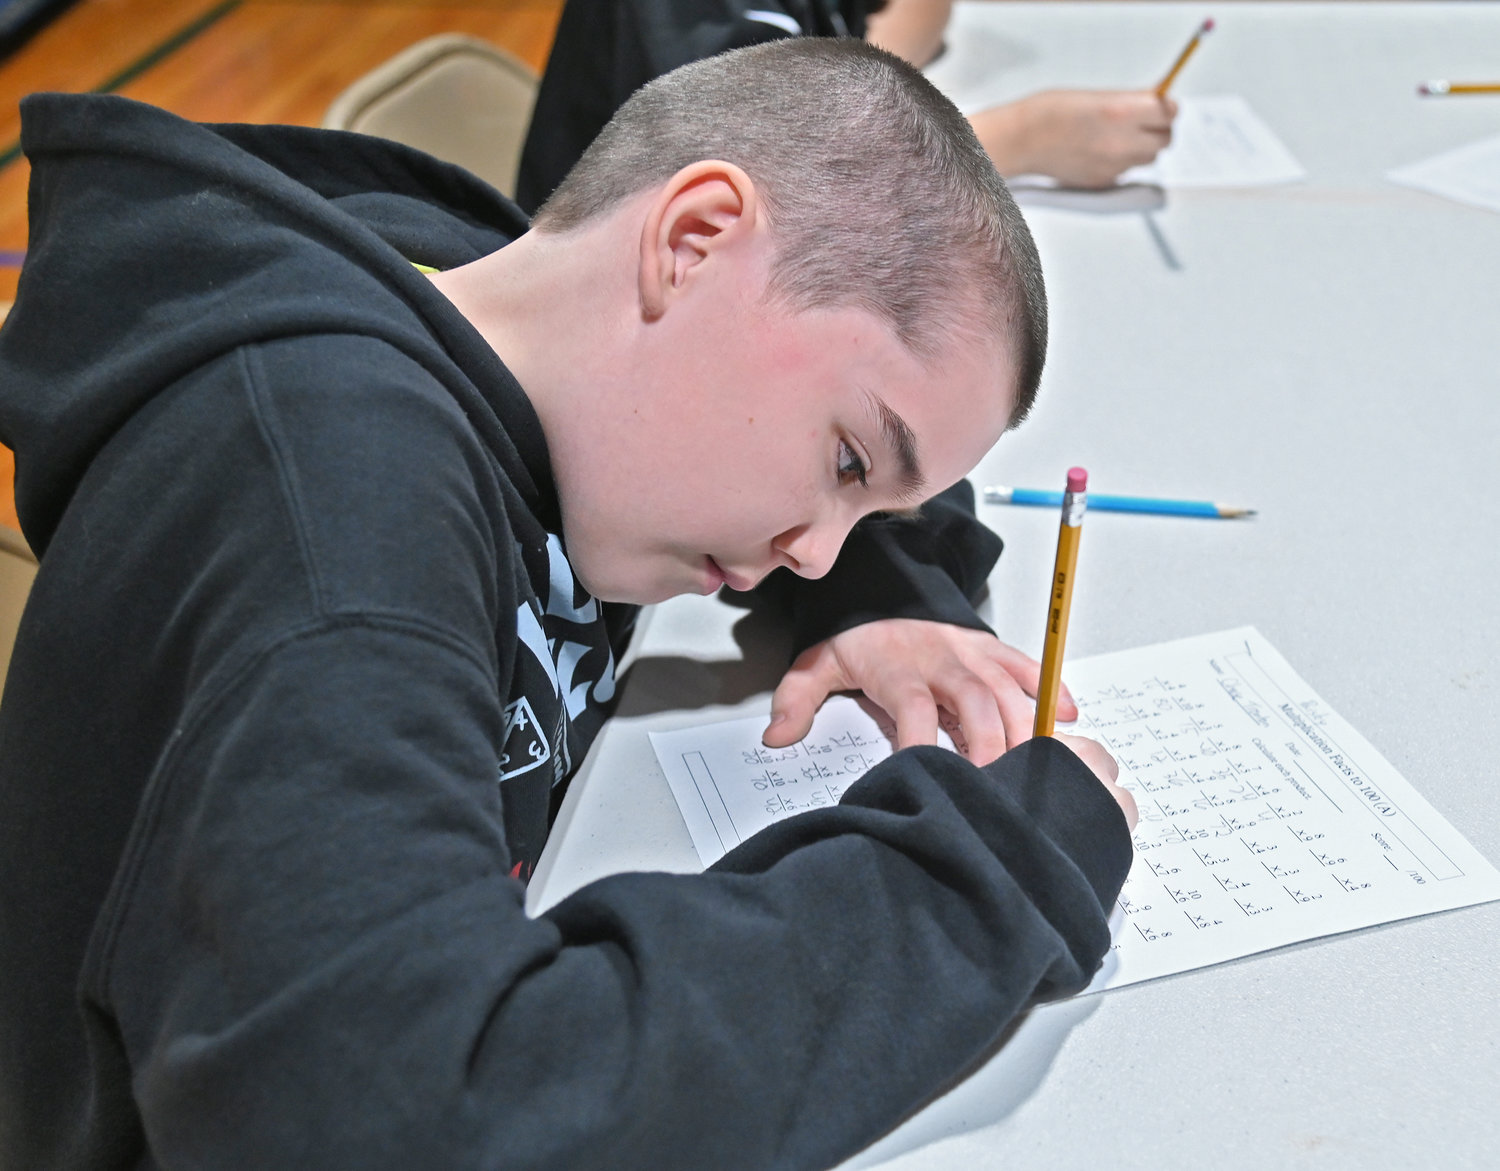 Gansevoort Elementary School sixth grader Chase Trenton powers through his math problems Friday, Feb. 10 during the Math Fact Super Bowl STEM finals.